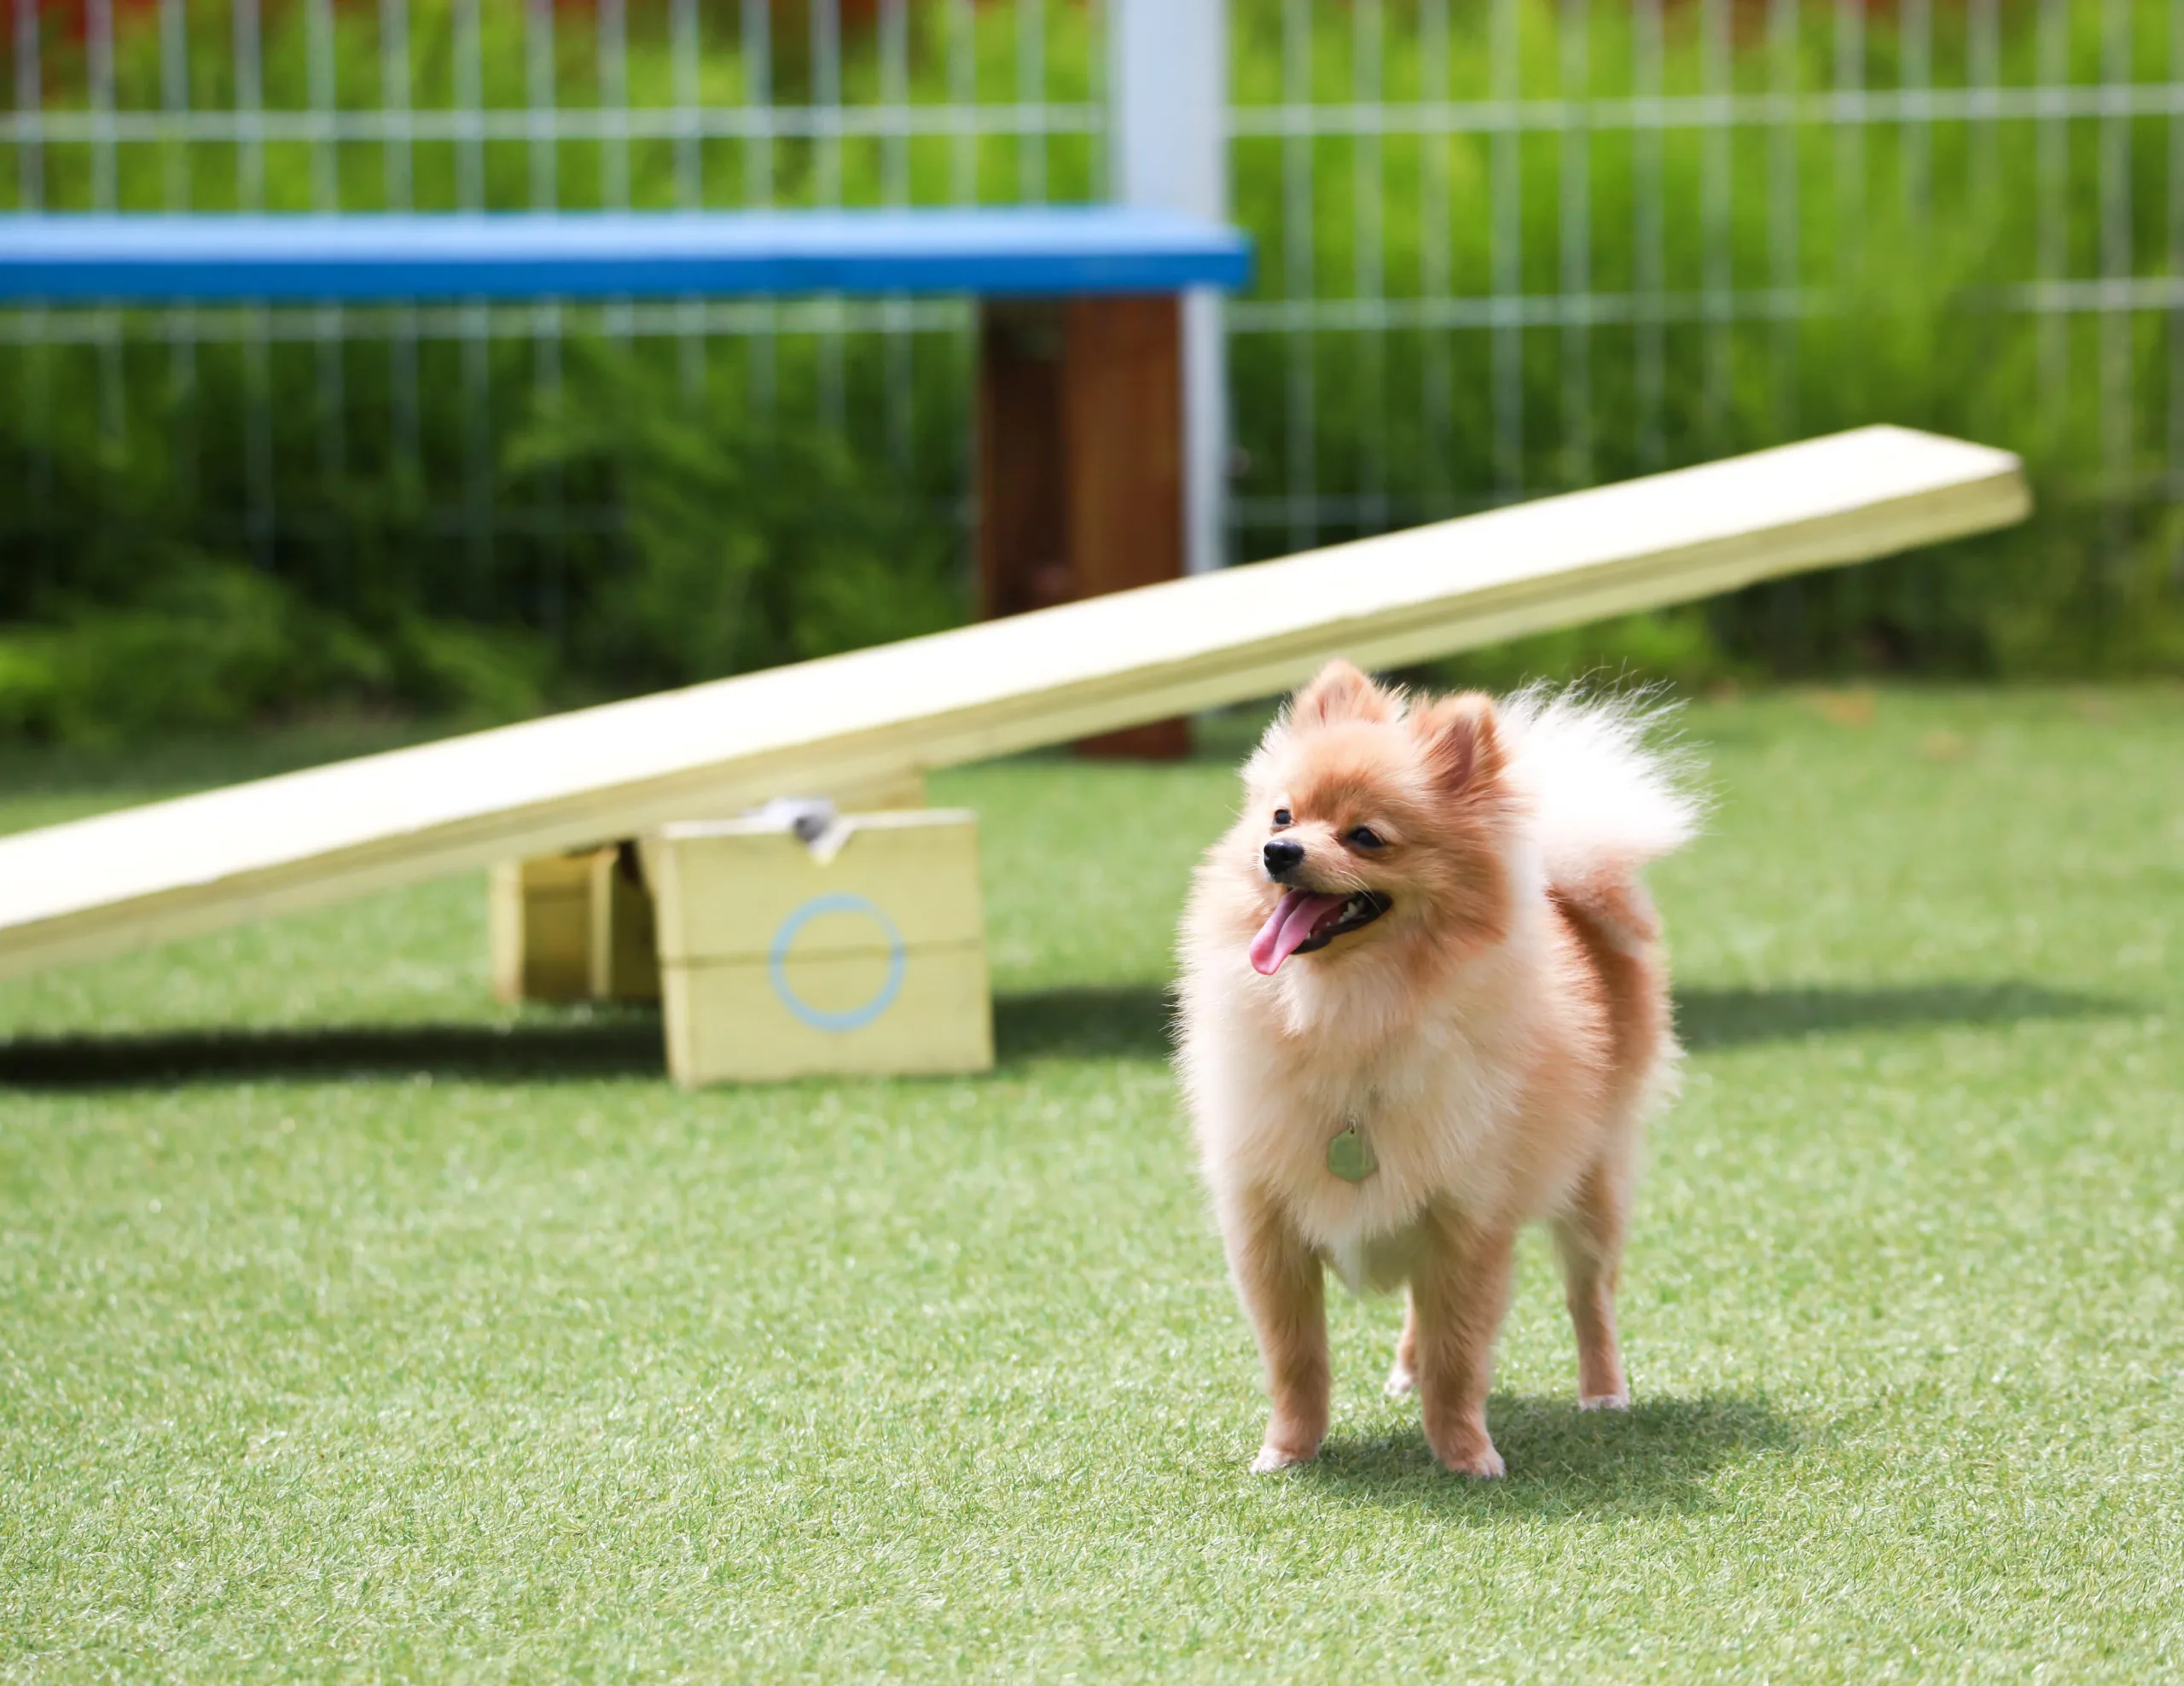 Pomeranian panting standing on the grass in the dog park. The sun is shining down, and, in the background, there is a teeter-totter ramp and bench with some green foliage and a fence. with ramp blurred in the background.